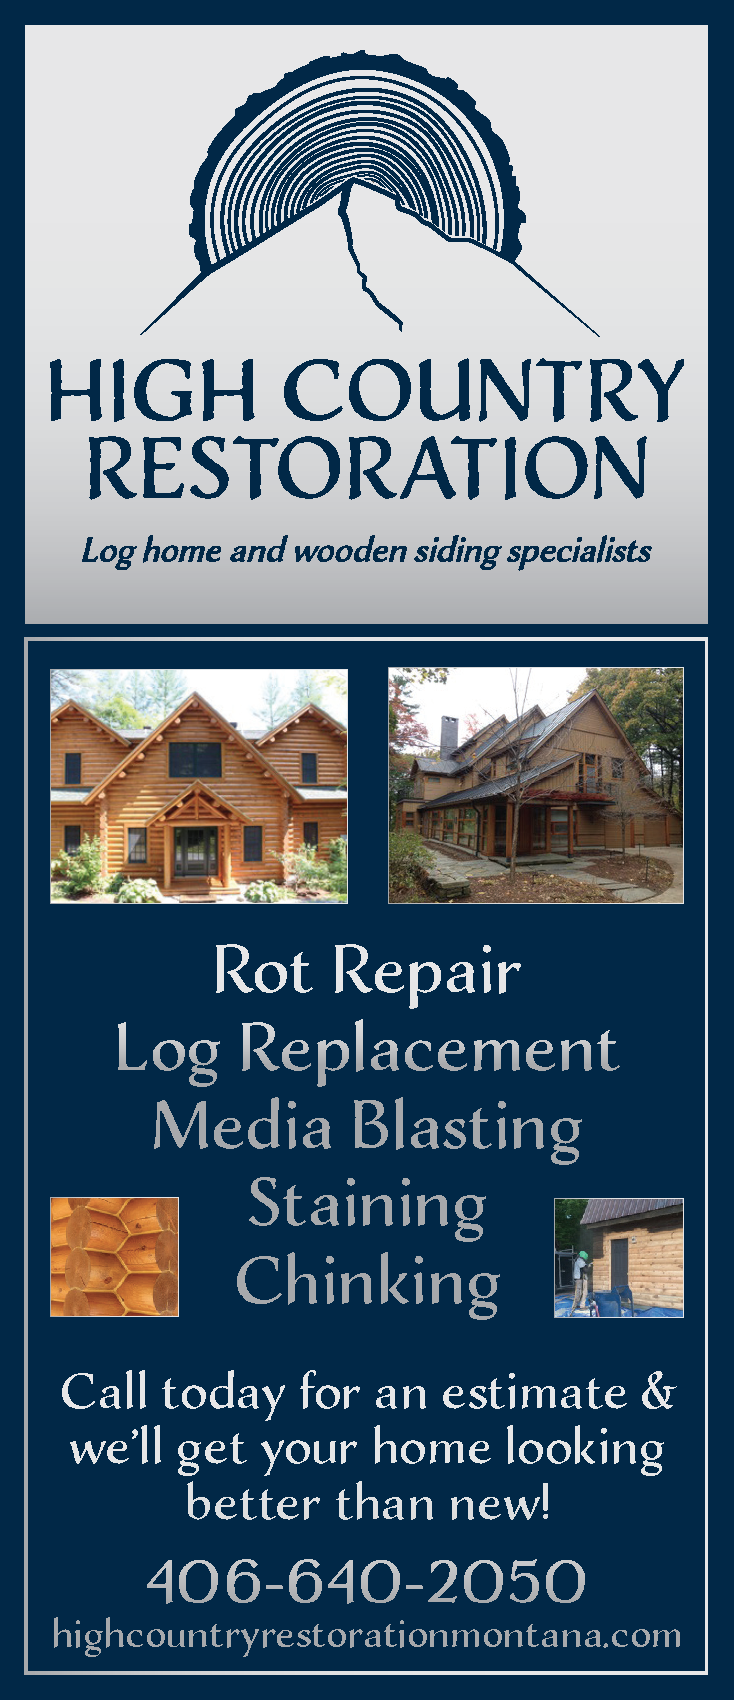 Hihg Country Restoration Rack Card Design for Big Sky Chamber of Commerce Display